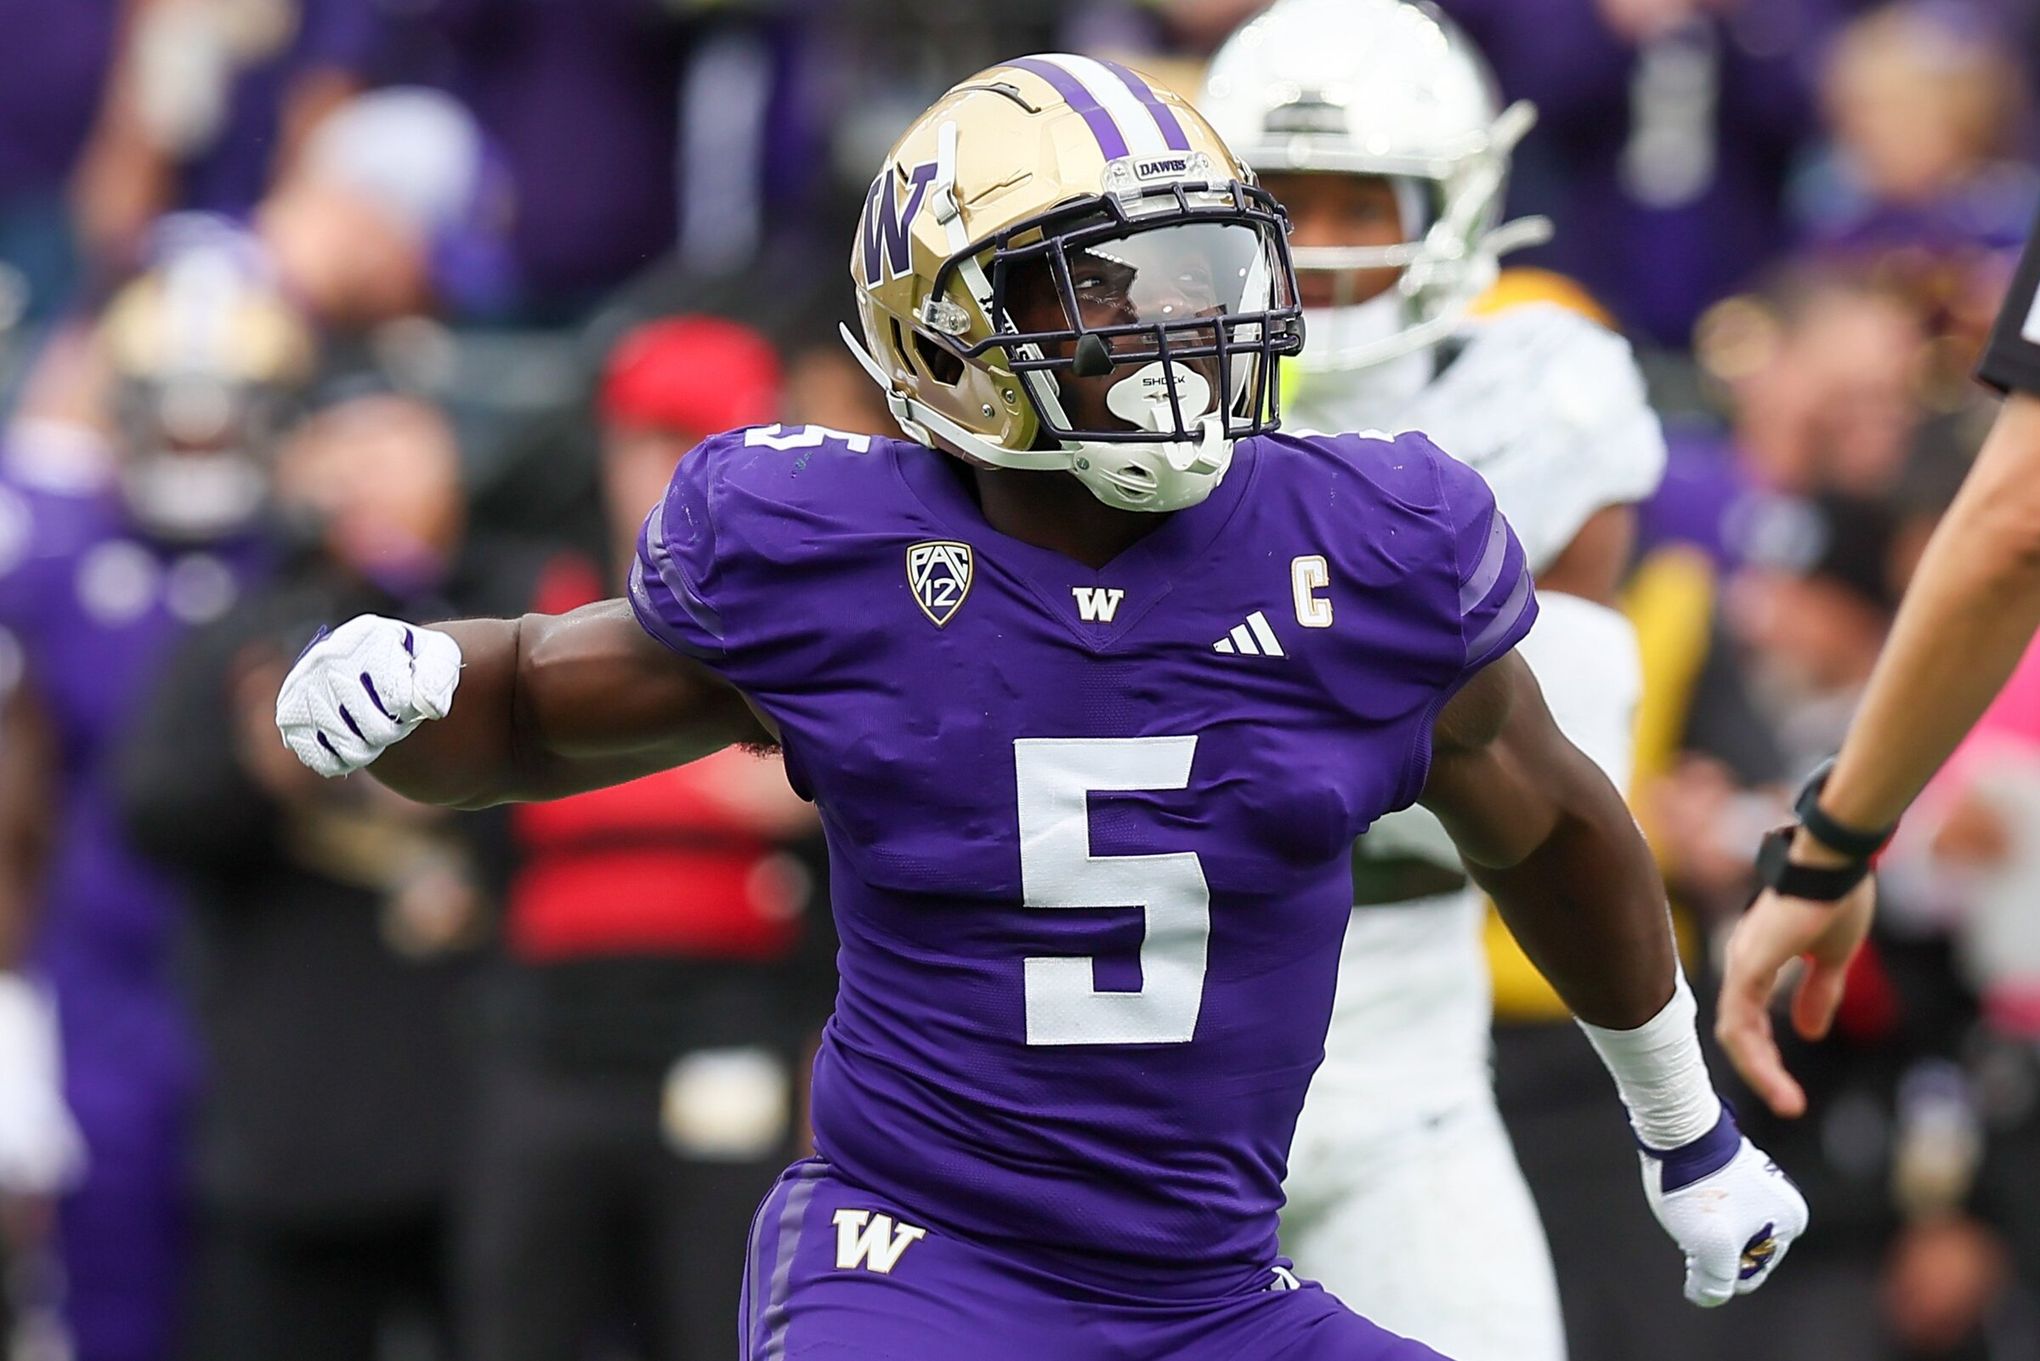 Pac-12 power rankings: UW rises after epic win over Oregon, while WSU drops